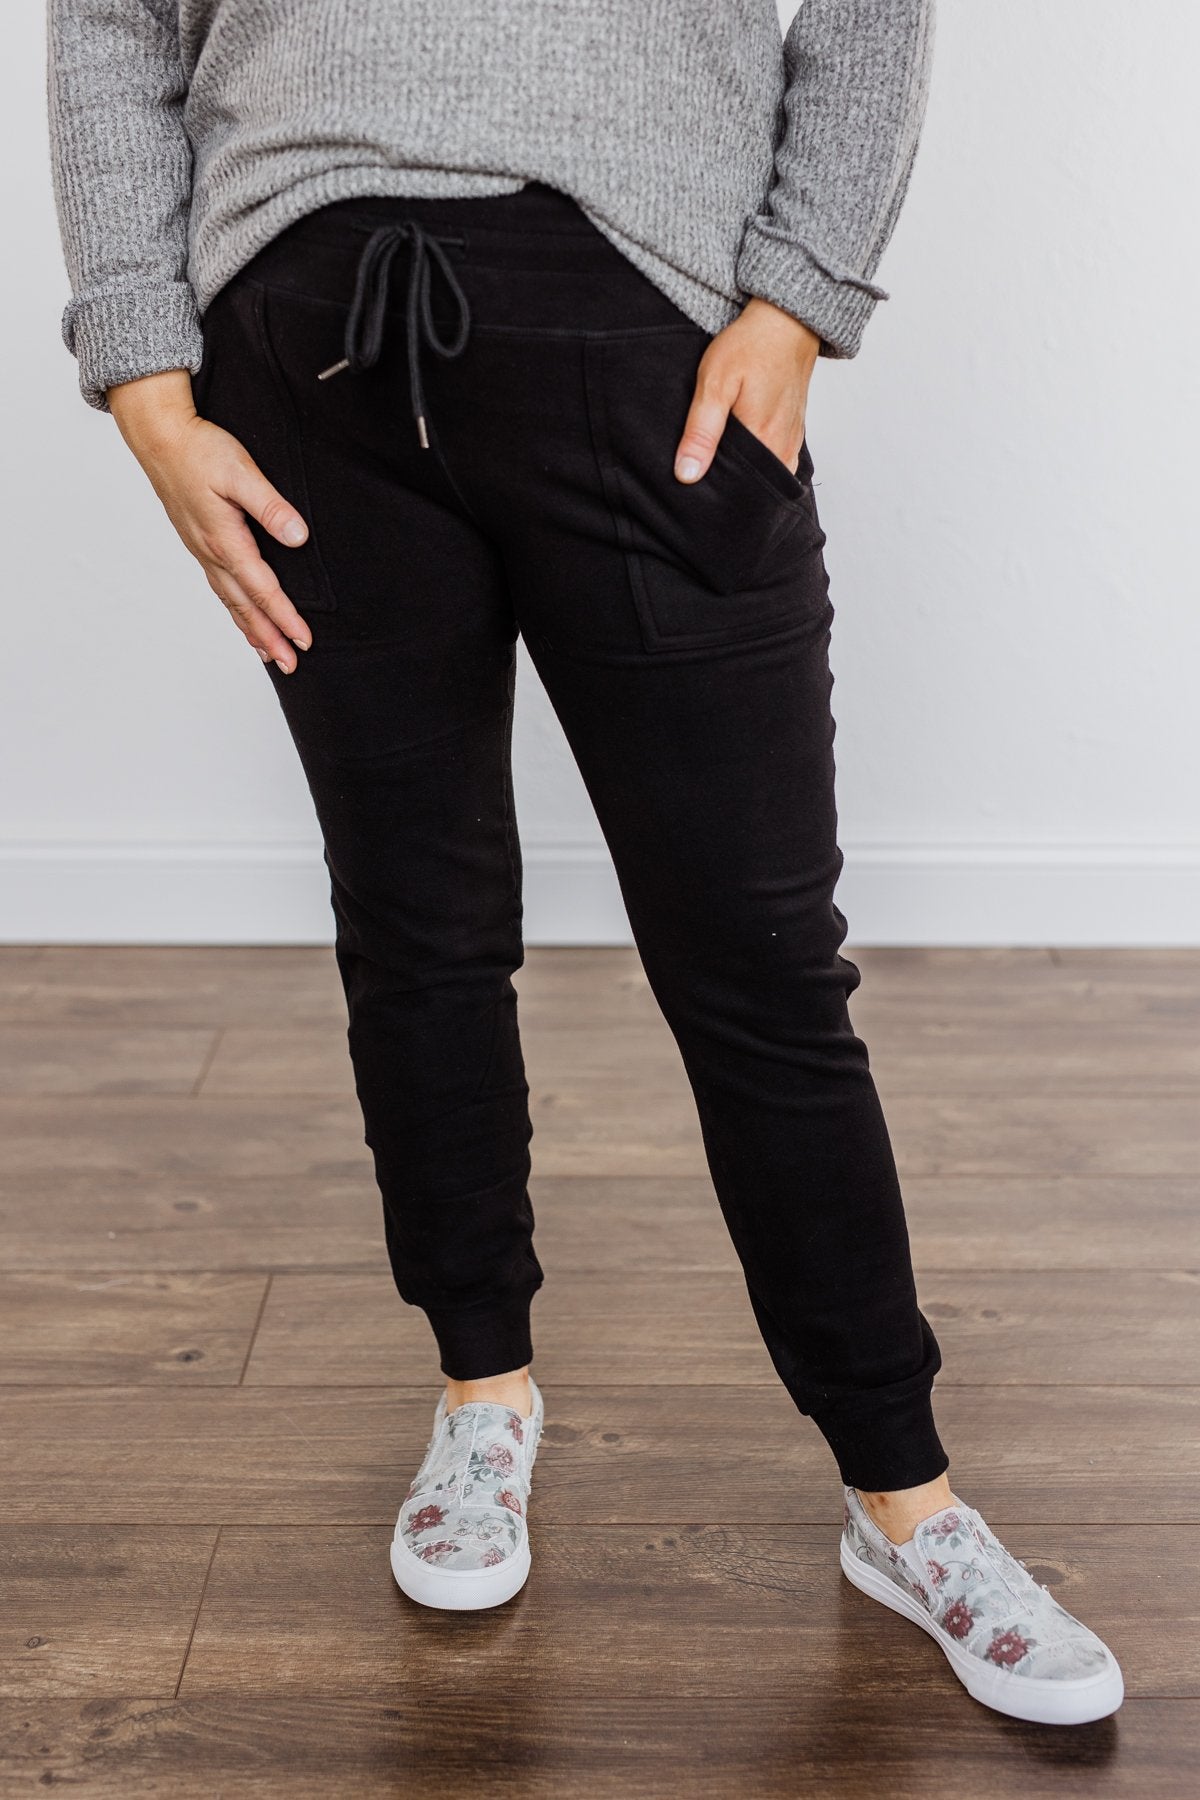 Warm Thoughts Super Soft Joggers- Black